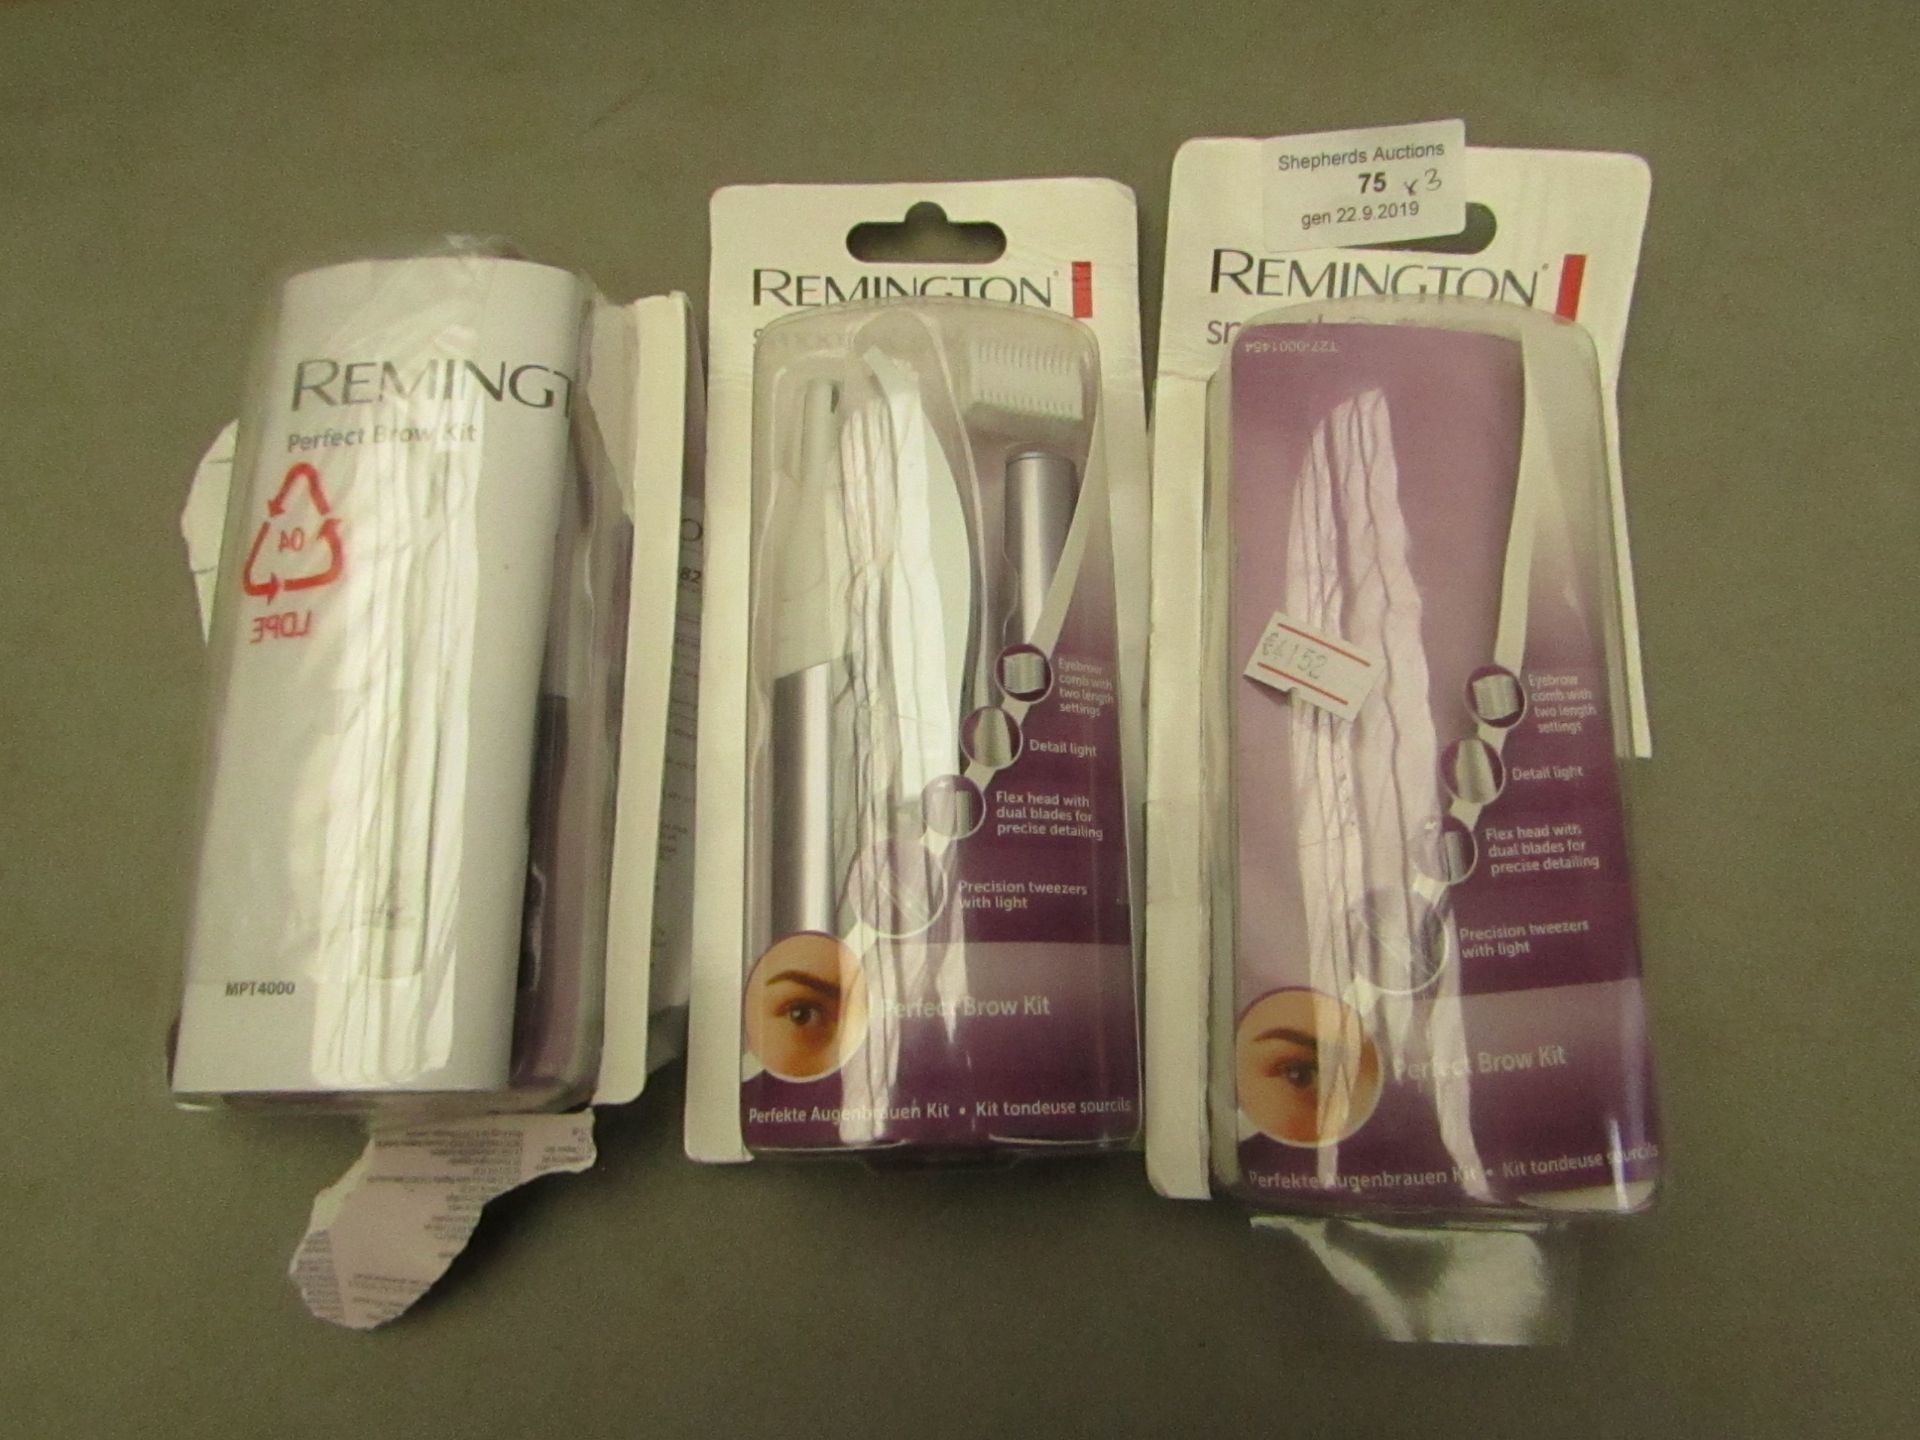 3 x Remington Smooth & Silky perfect brow Kit, Packaged and Unchecked, RRP £17.99 Each